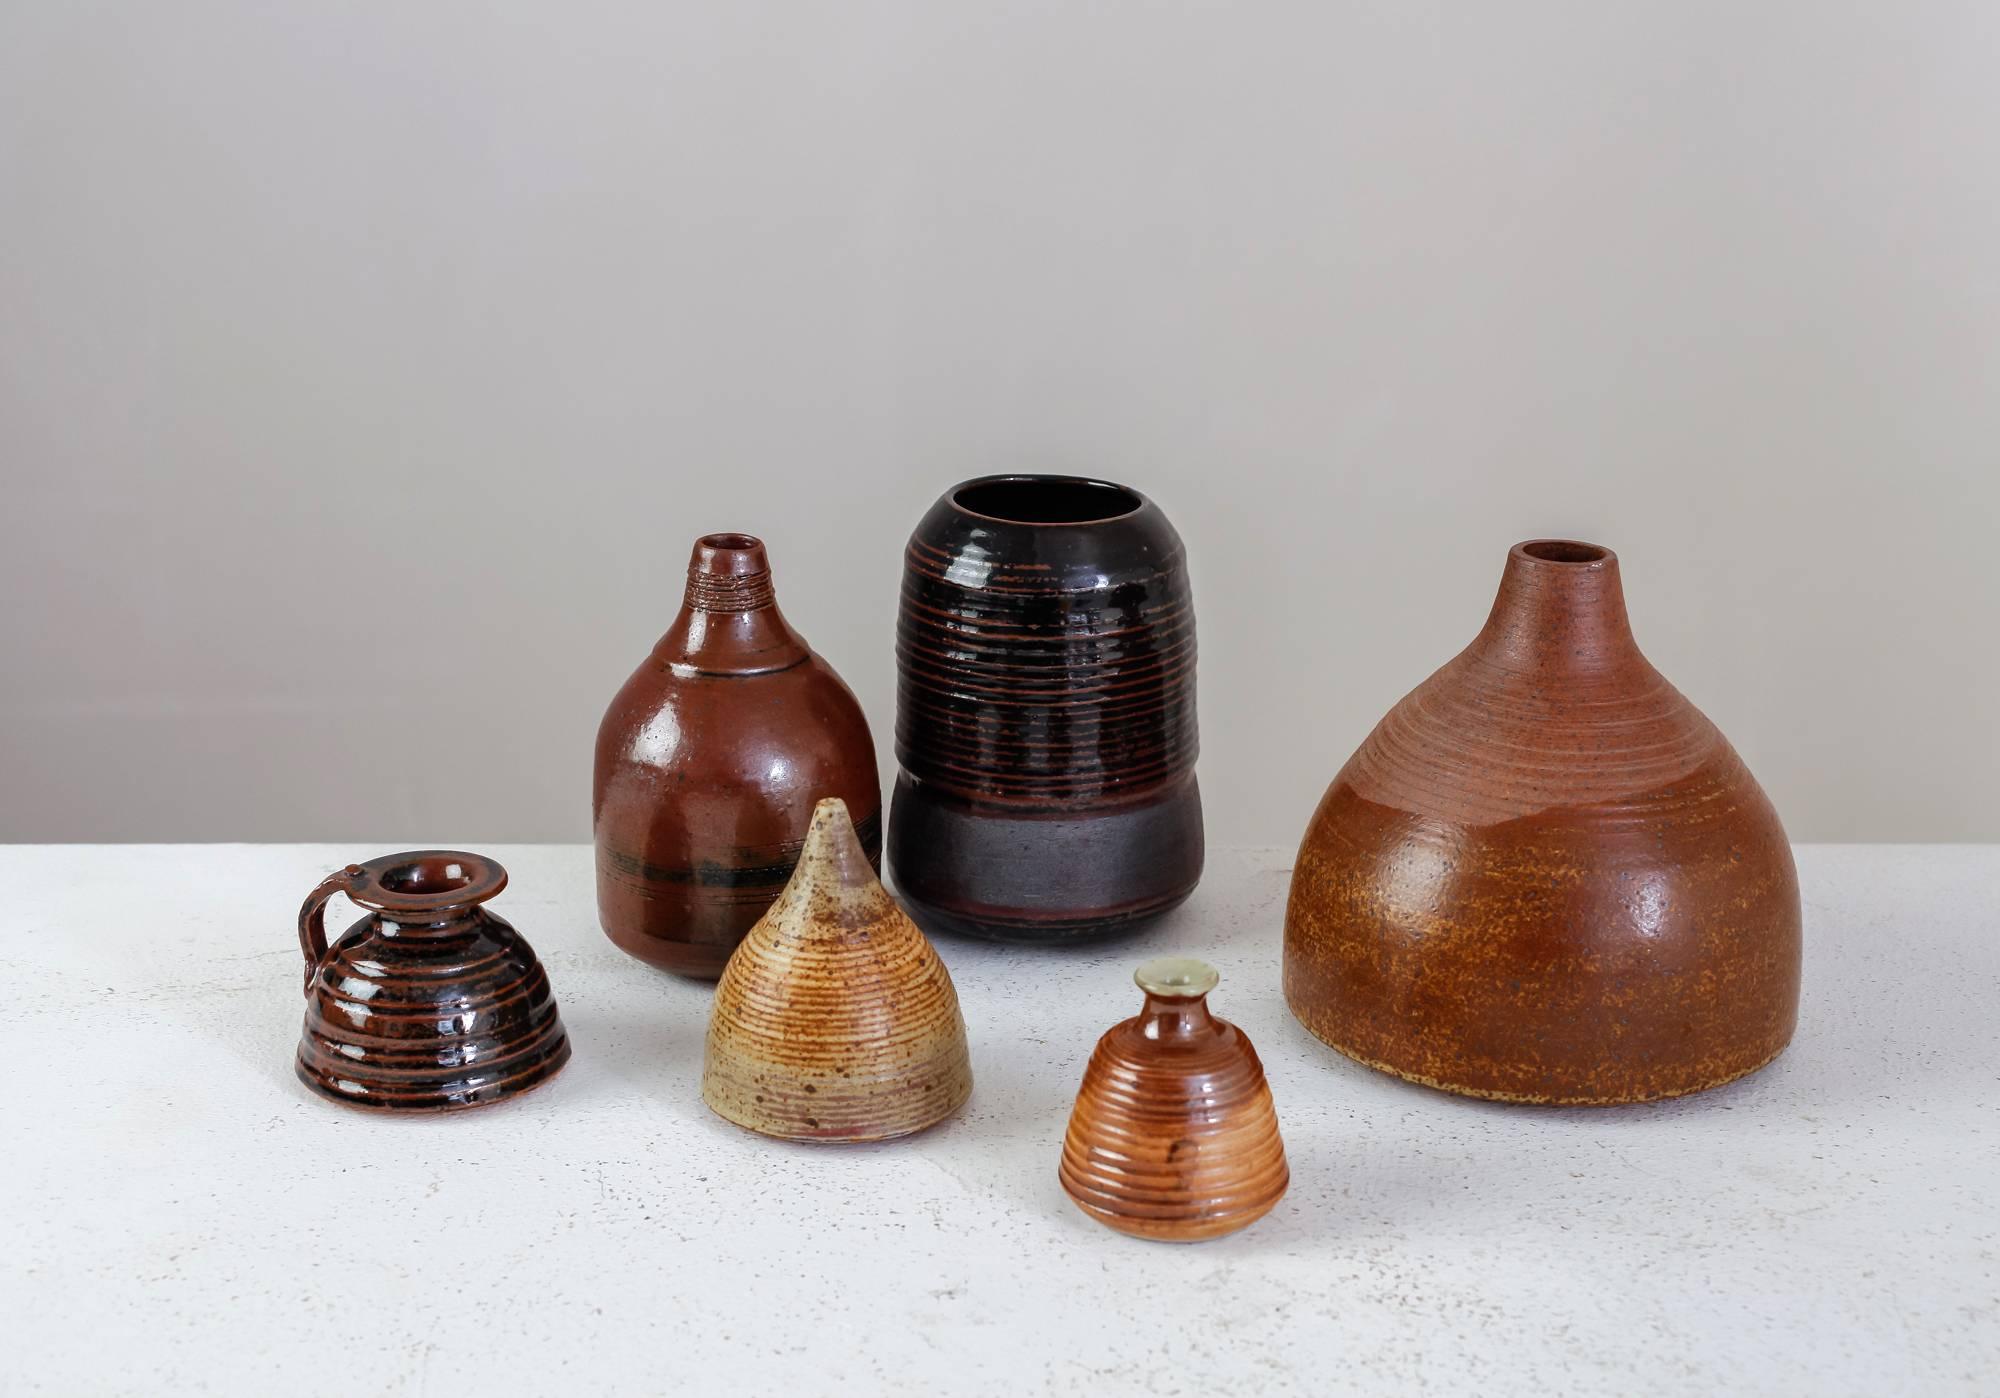 A set of six vases in a brown to nearly black glaze finish, by French ceramist Franco Agnese. 
The lowest piece is 7.5 cm (3 inch) high and has a 6 cm (2.4 inch) diameter. The tallest vase is 15.5 cm (6.1 inch) high with a 16 cm (6.3 inch)